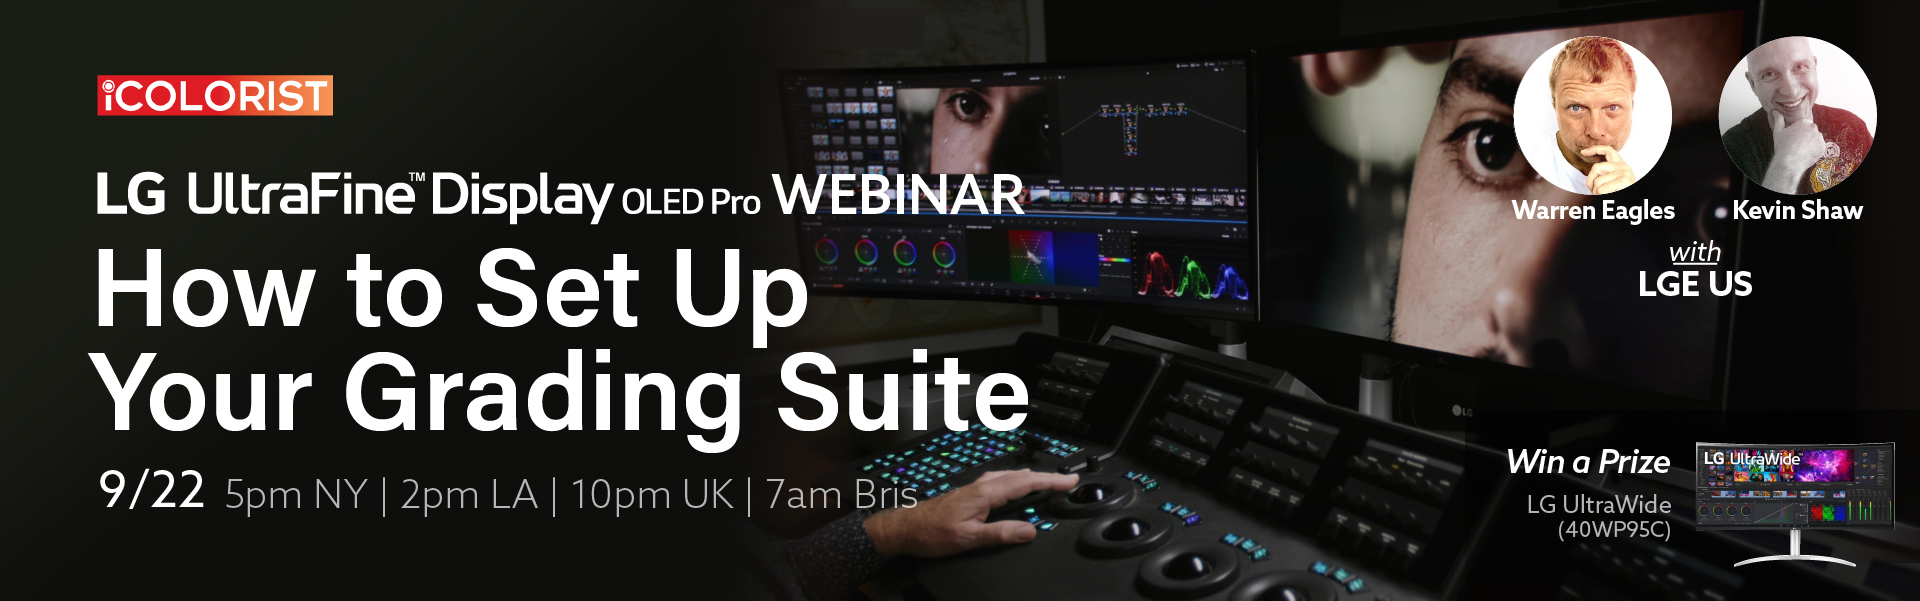 How to Set Up Your Grading Suite webinar